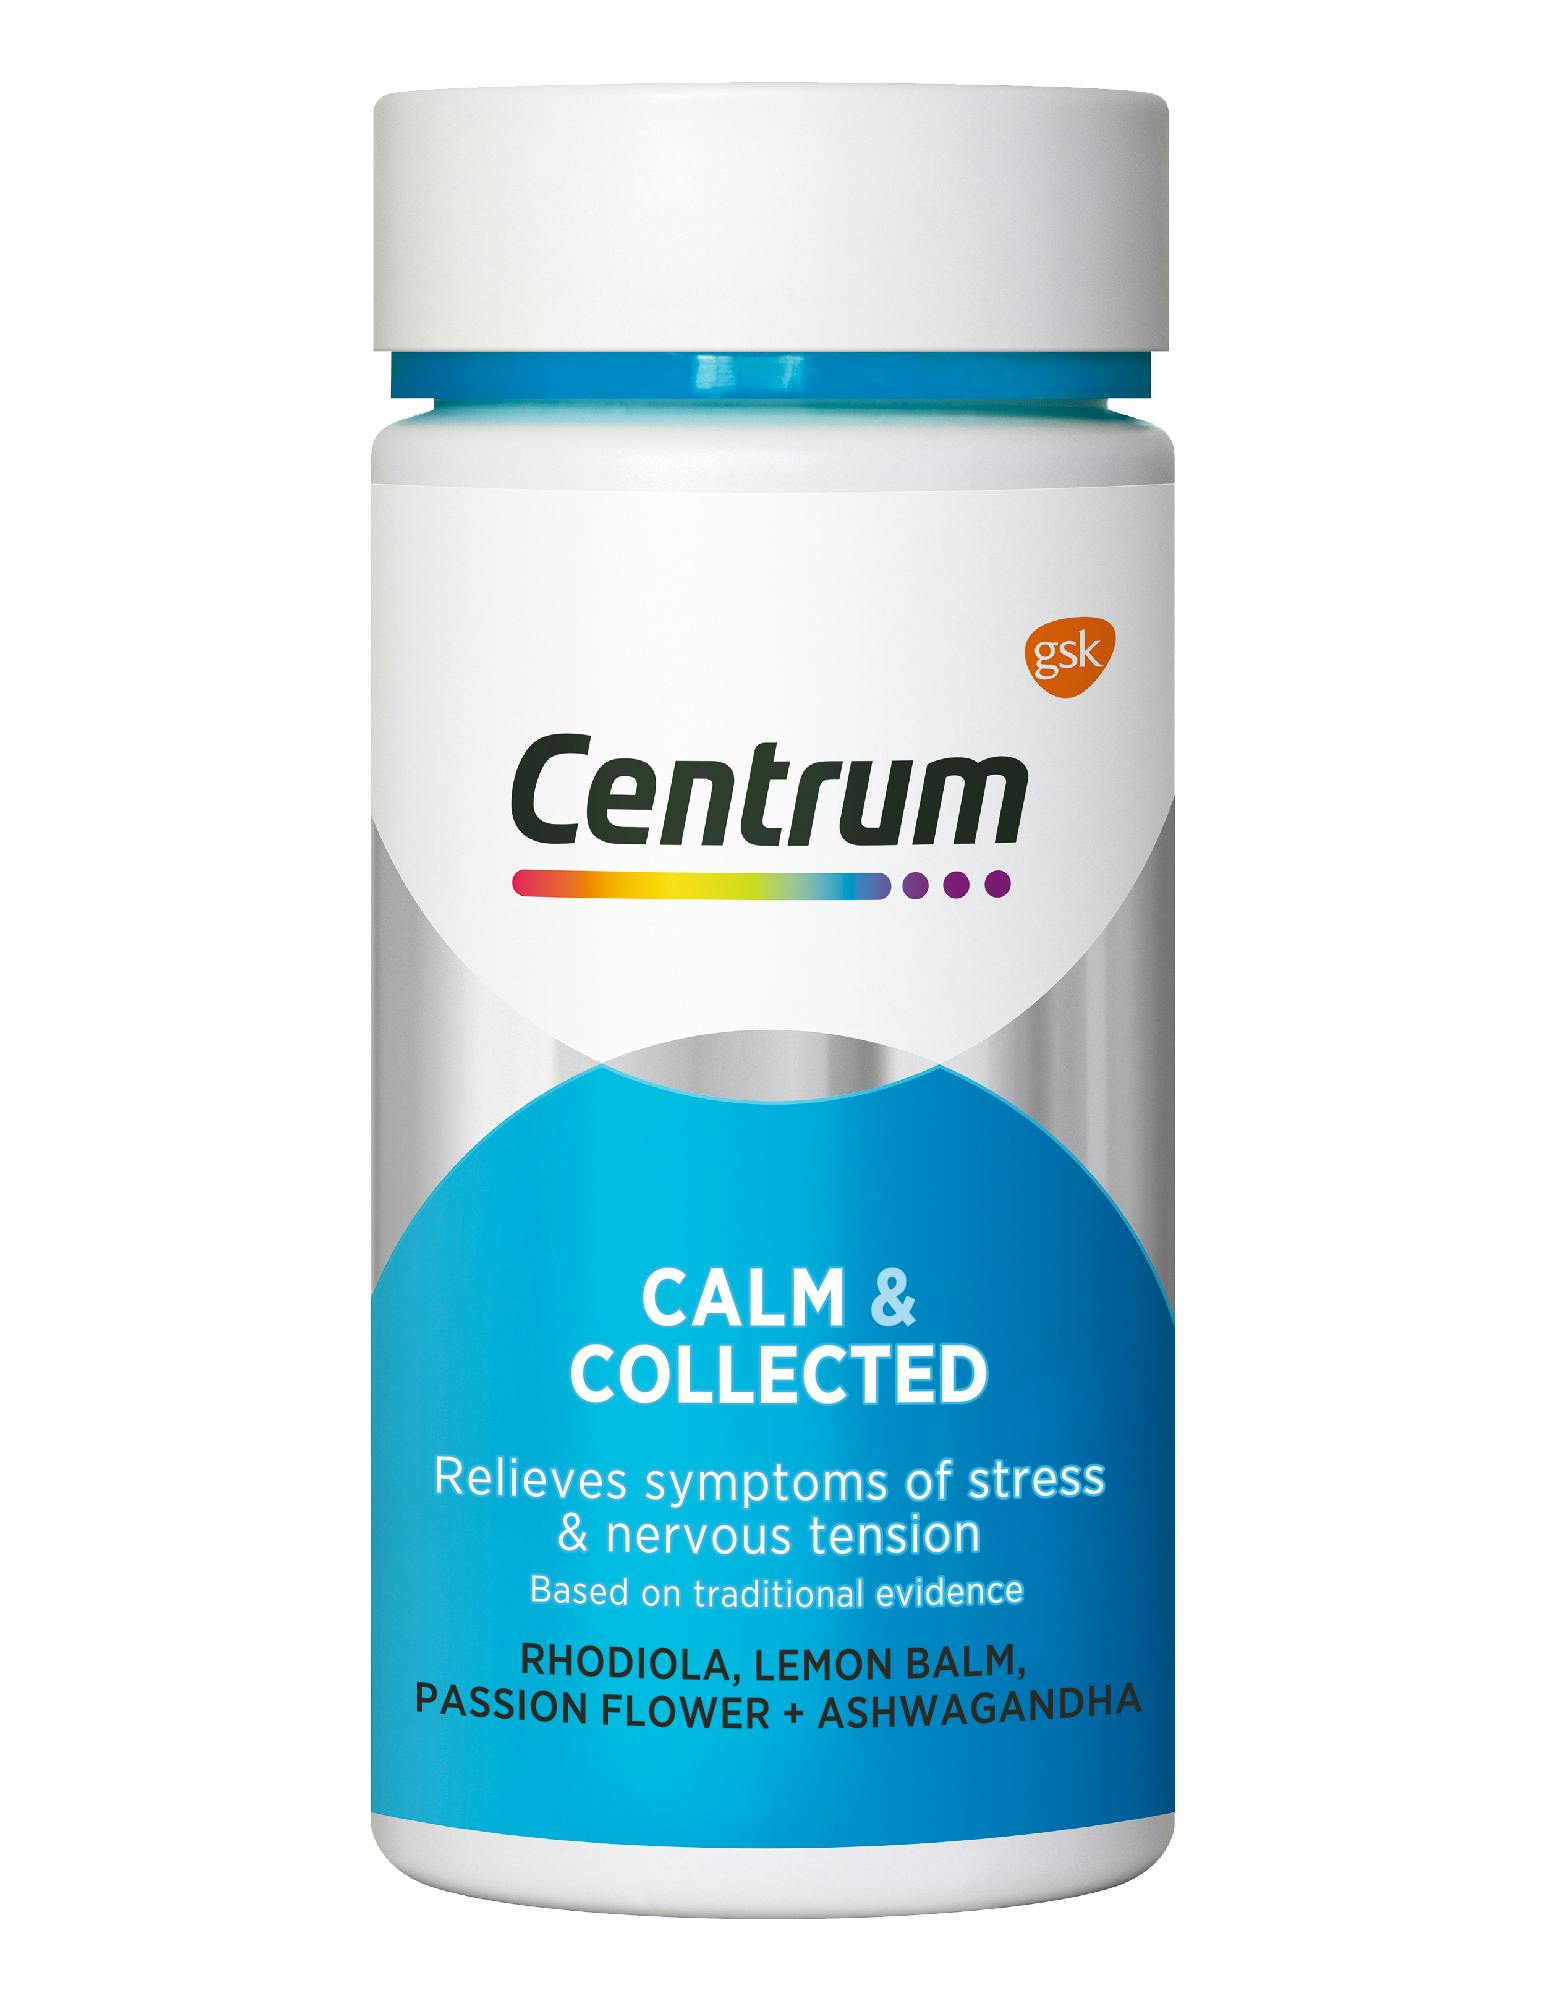 Box of Centrum Clam  and collected